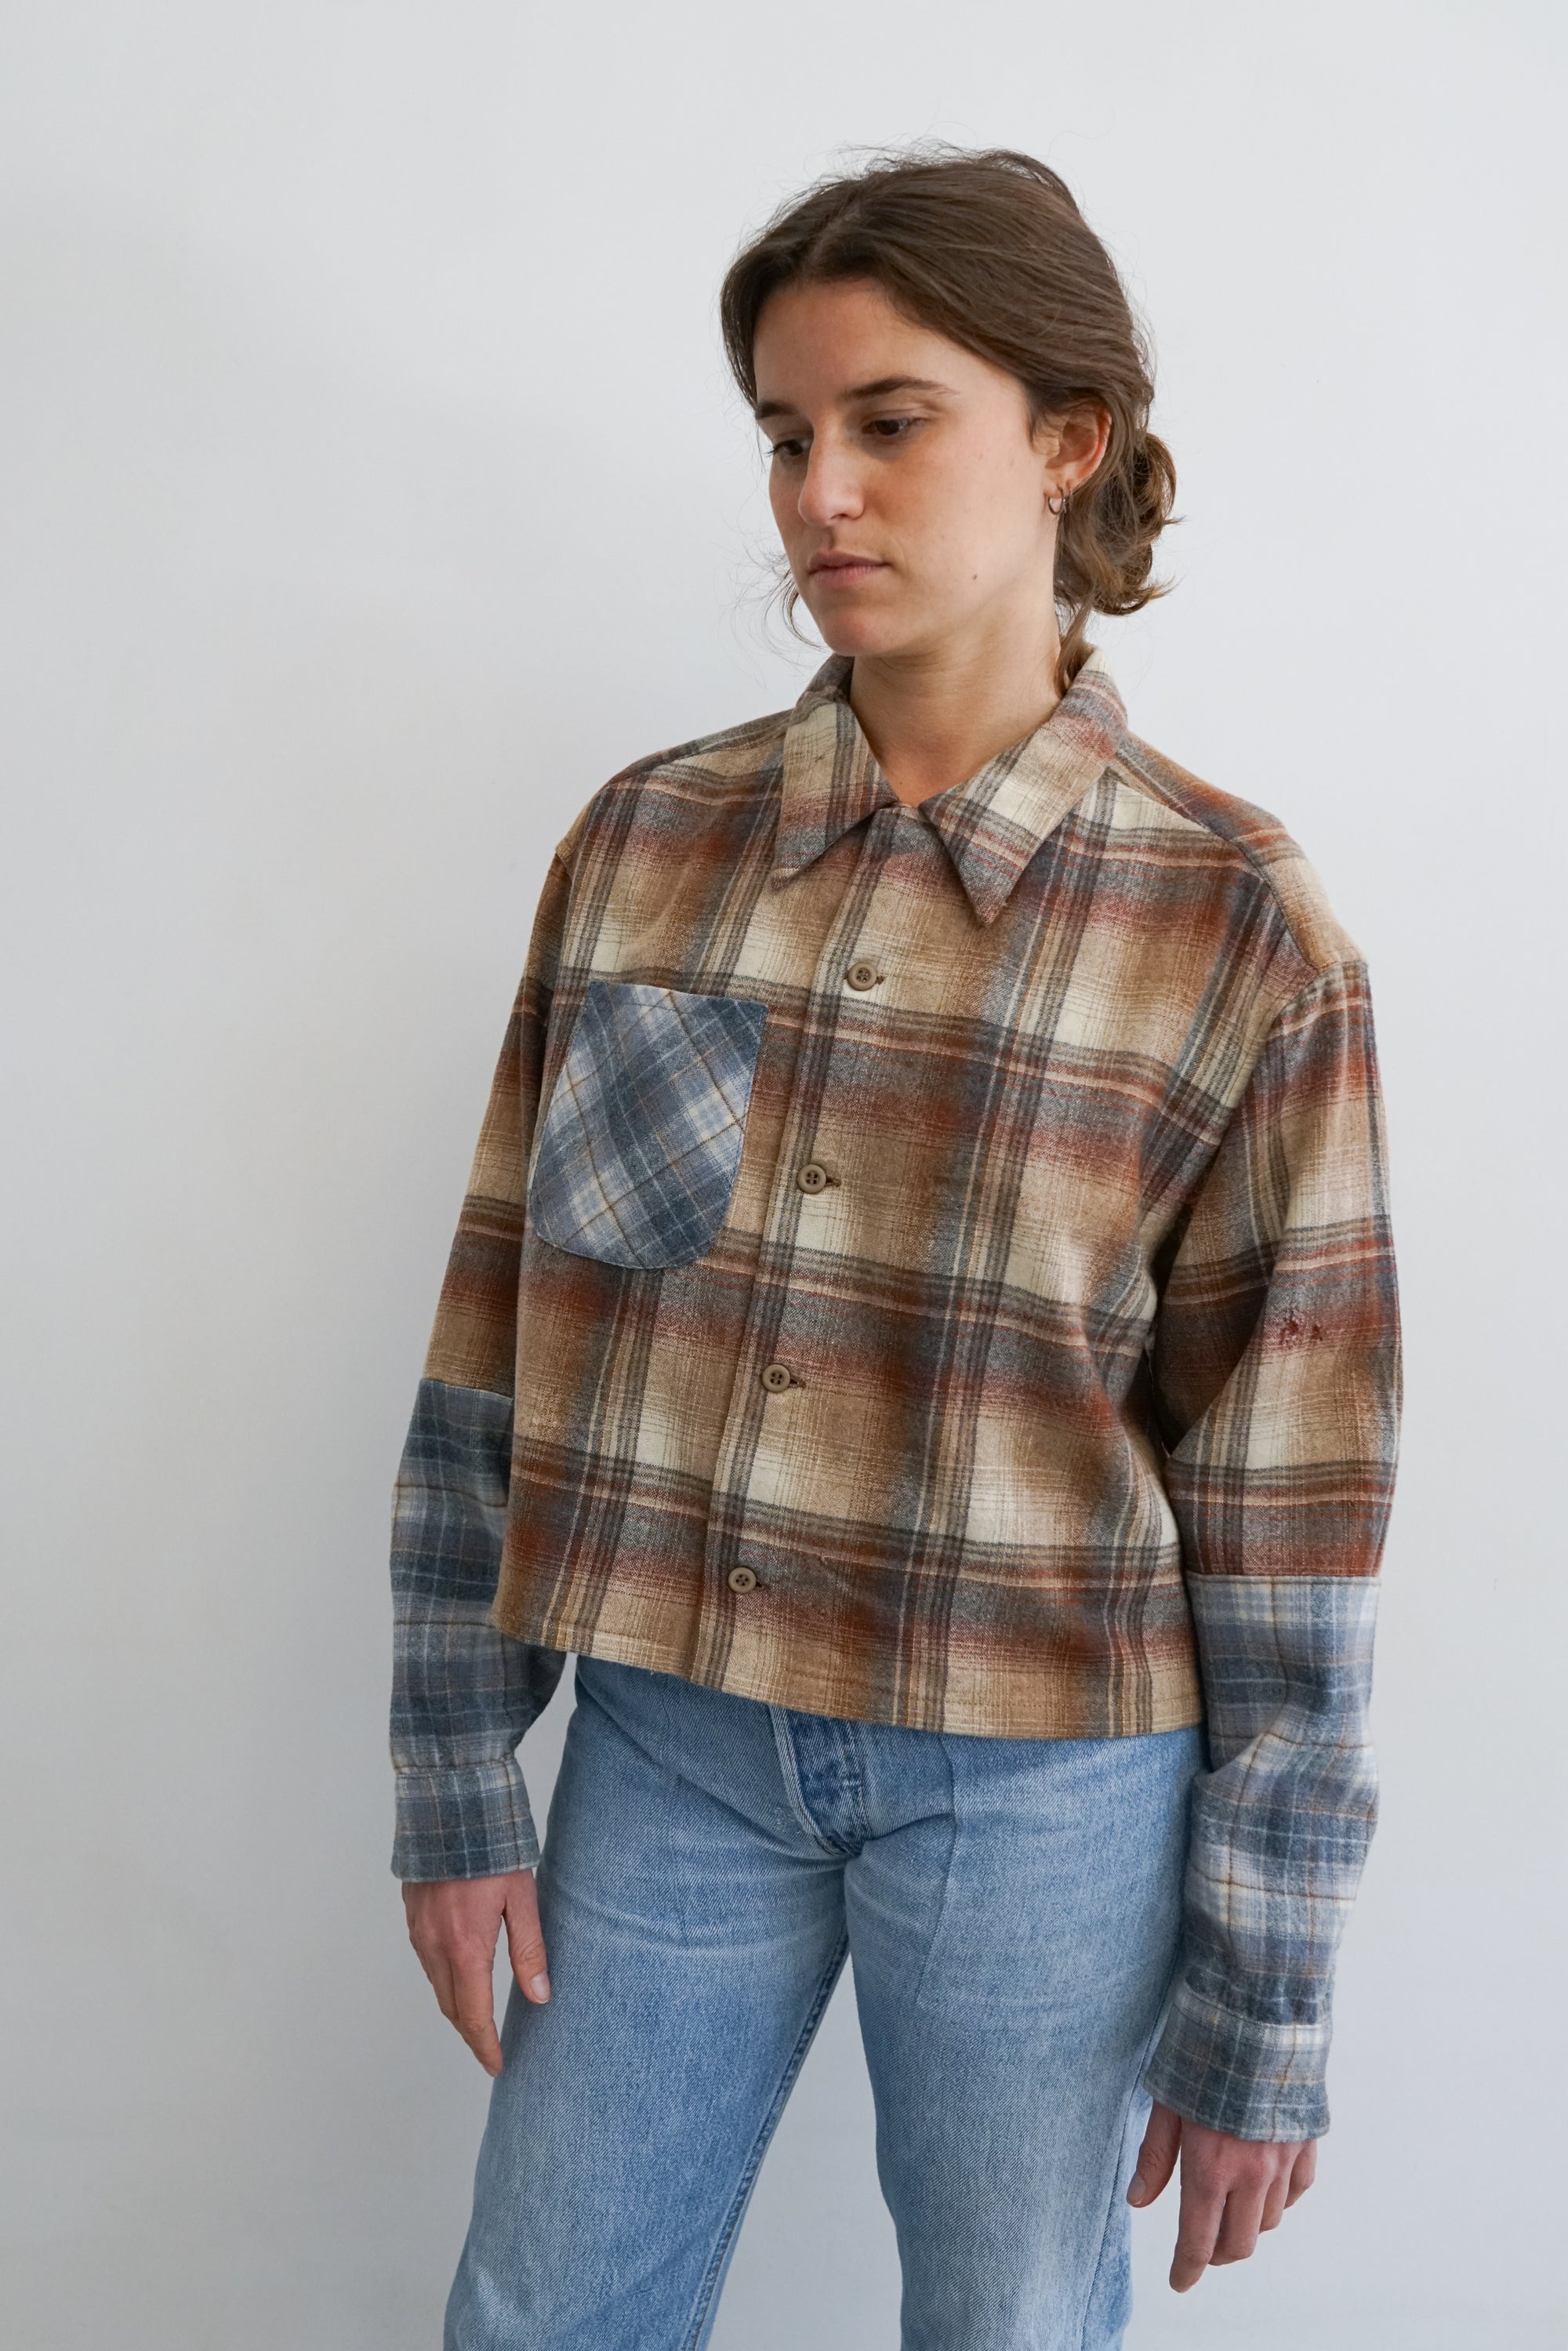 Reworked and Repaired Vintage Pendleton